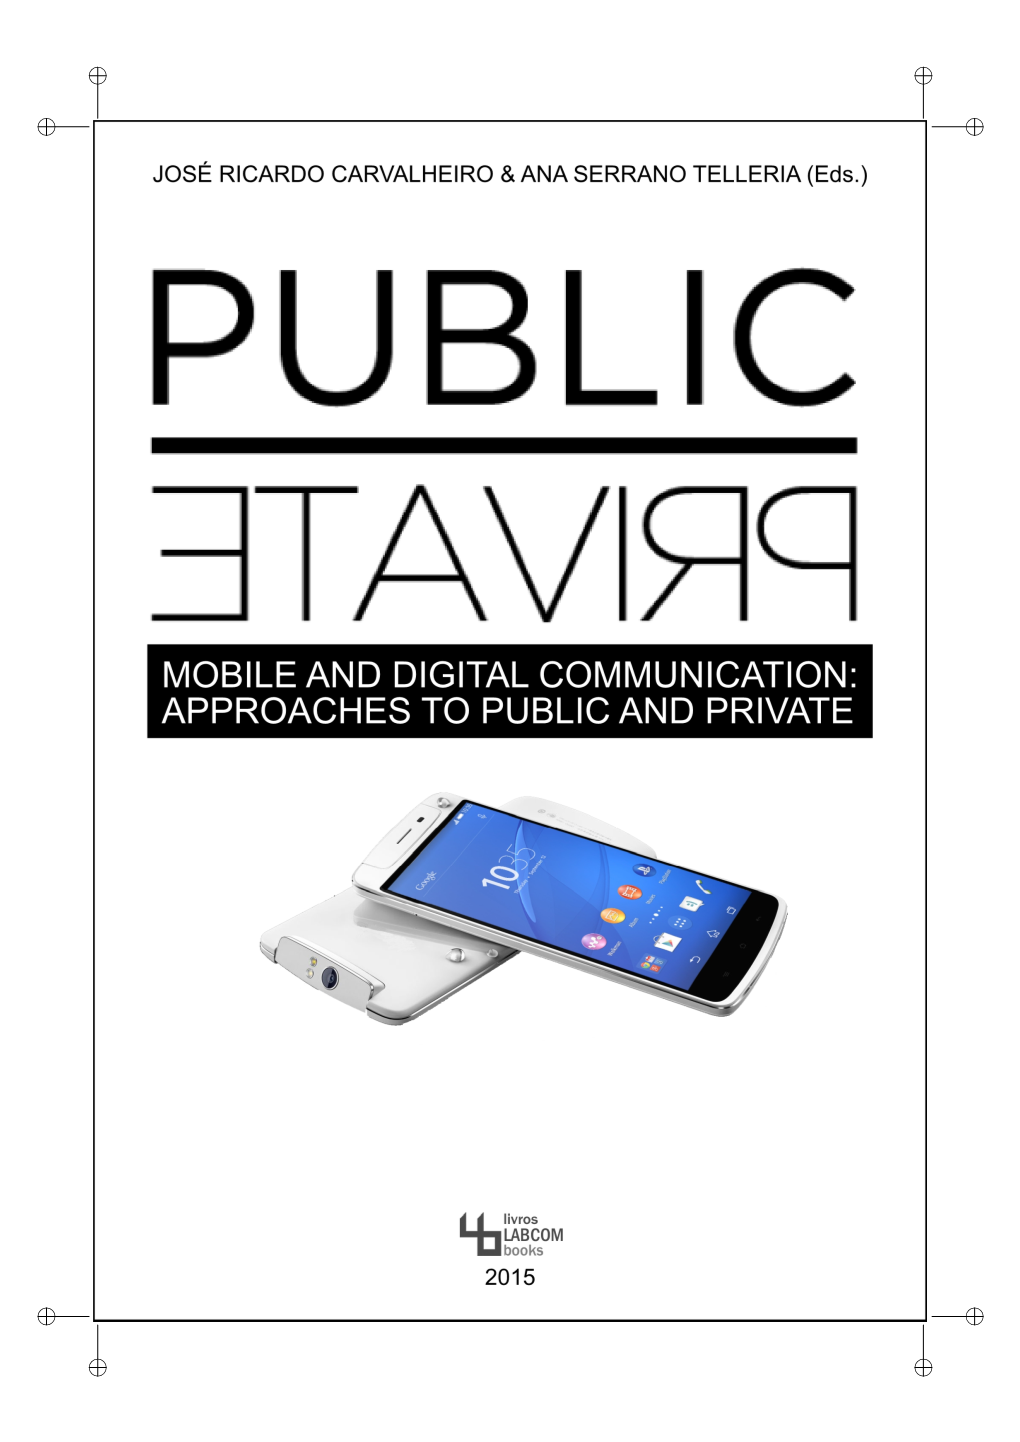 Mobile and Digital Communication: Approaches to Public and Private